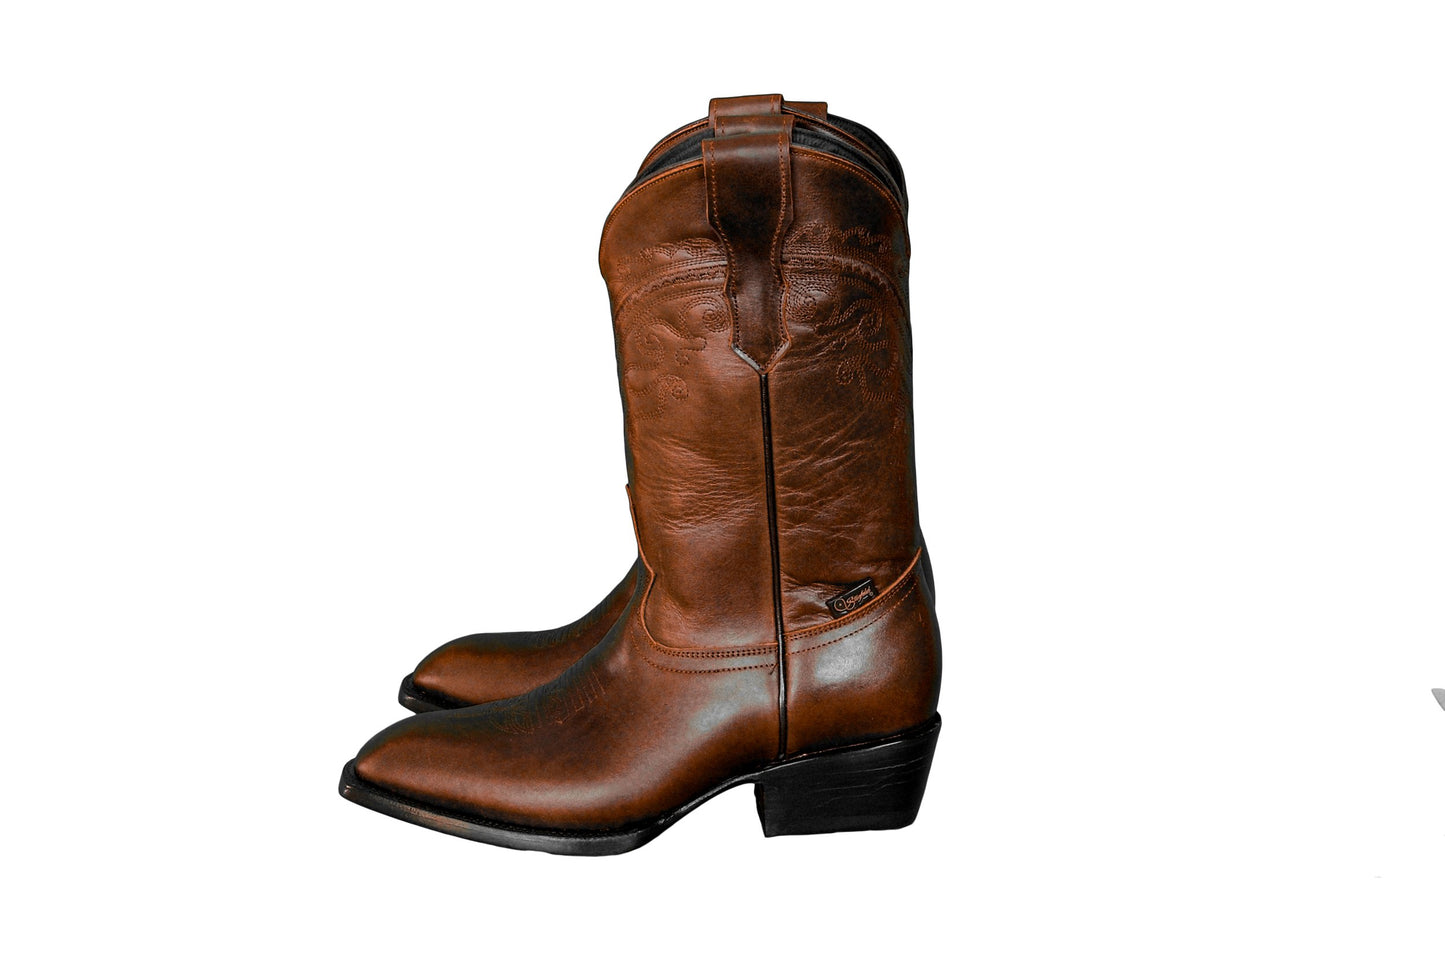 The Tobacco Caramel Boots